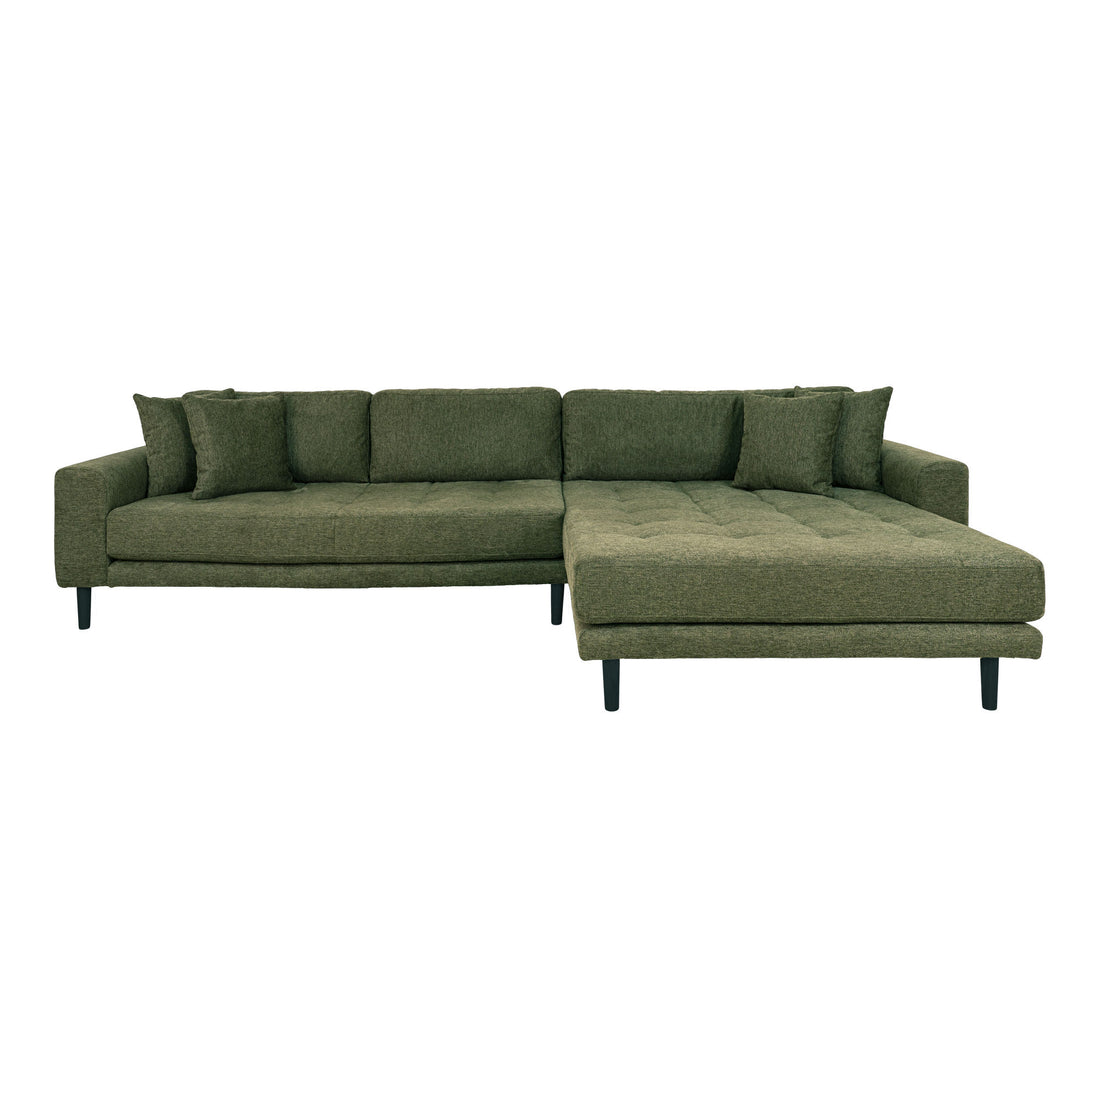 Lido Lounge Sofa - Lounge sofa, right -wing in olive green with four pillows and black wooden legs, HN1020 - 1 - pcs